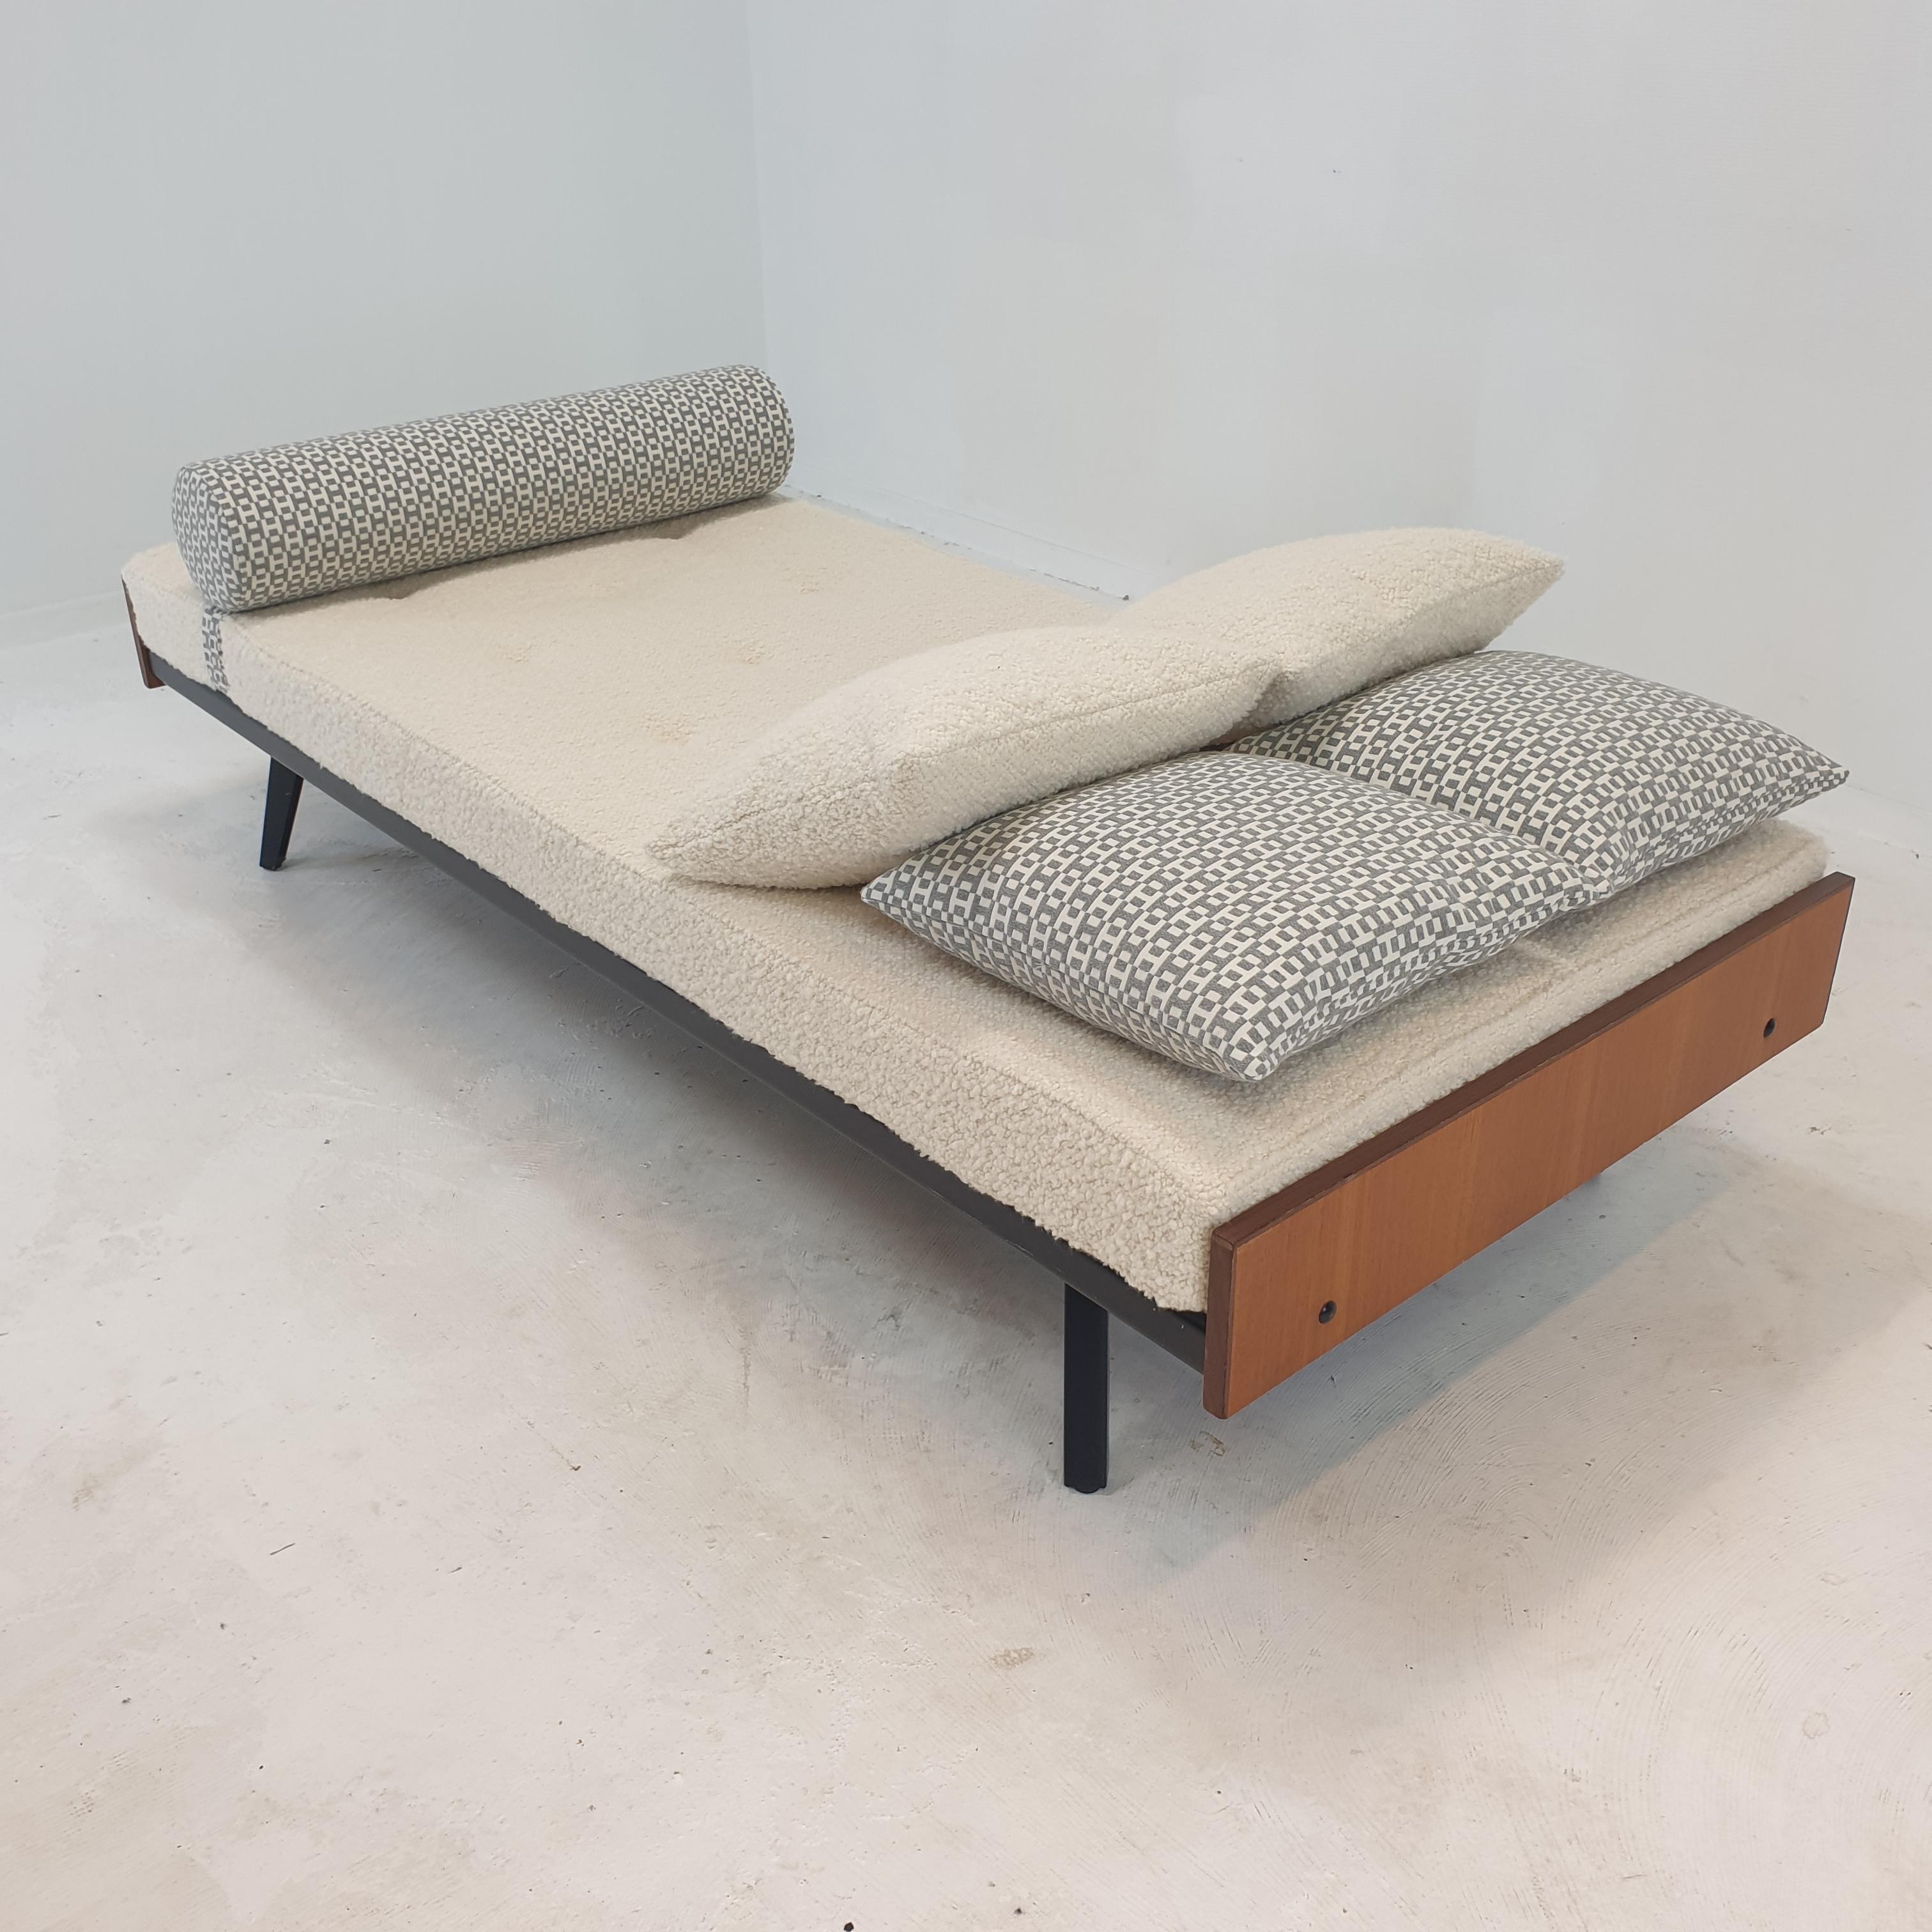 Woven Daybed with Hermes Cushions and Bolster, 1960s For Sale